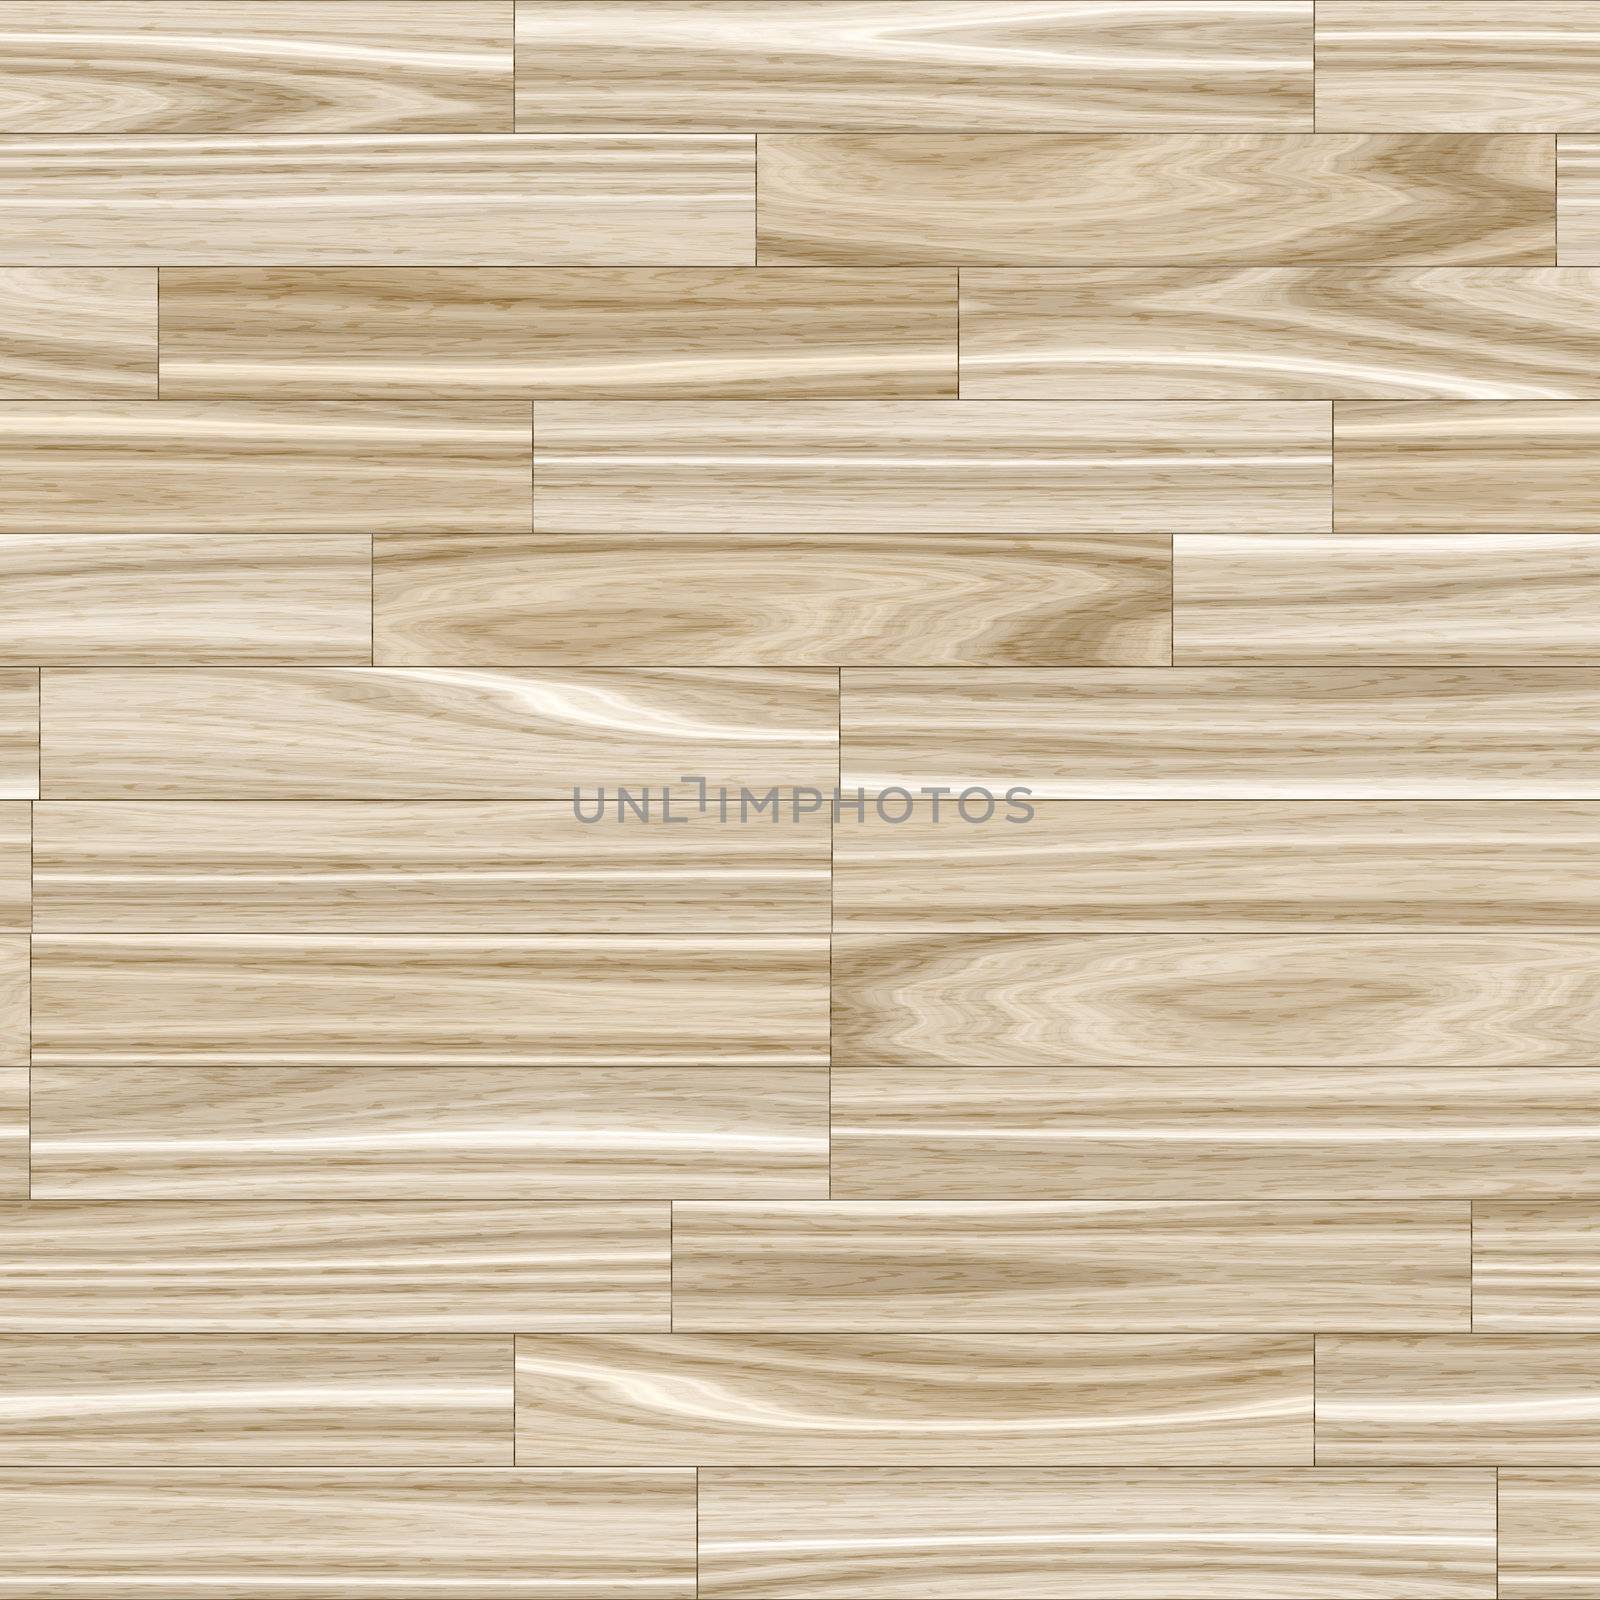 Light Wood Grain Parquet by graficallyminded